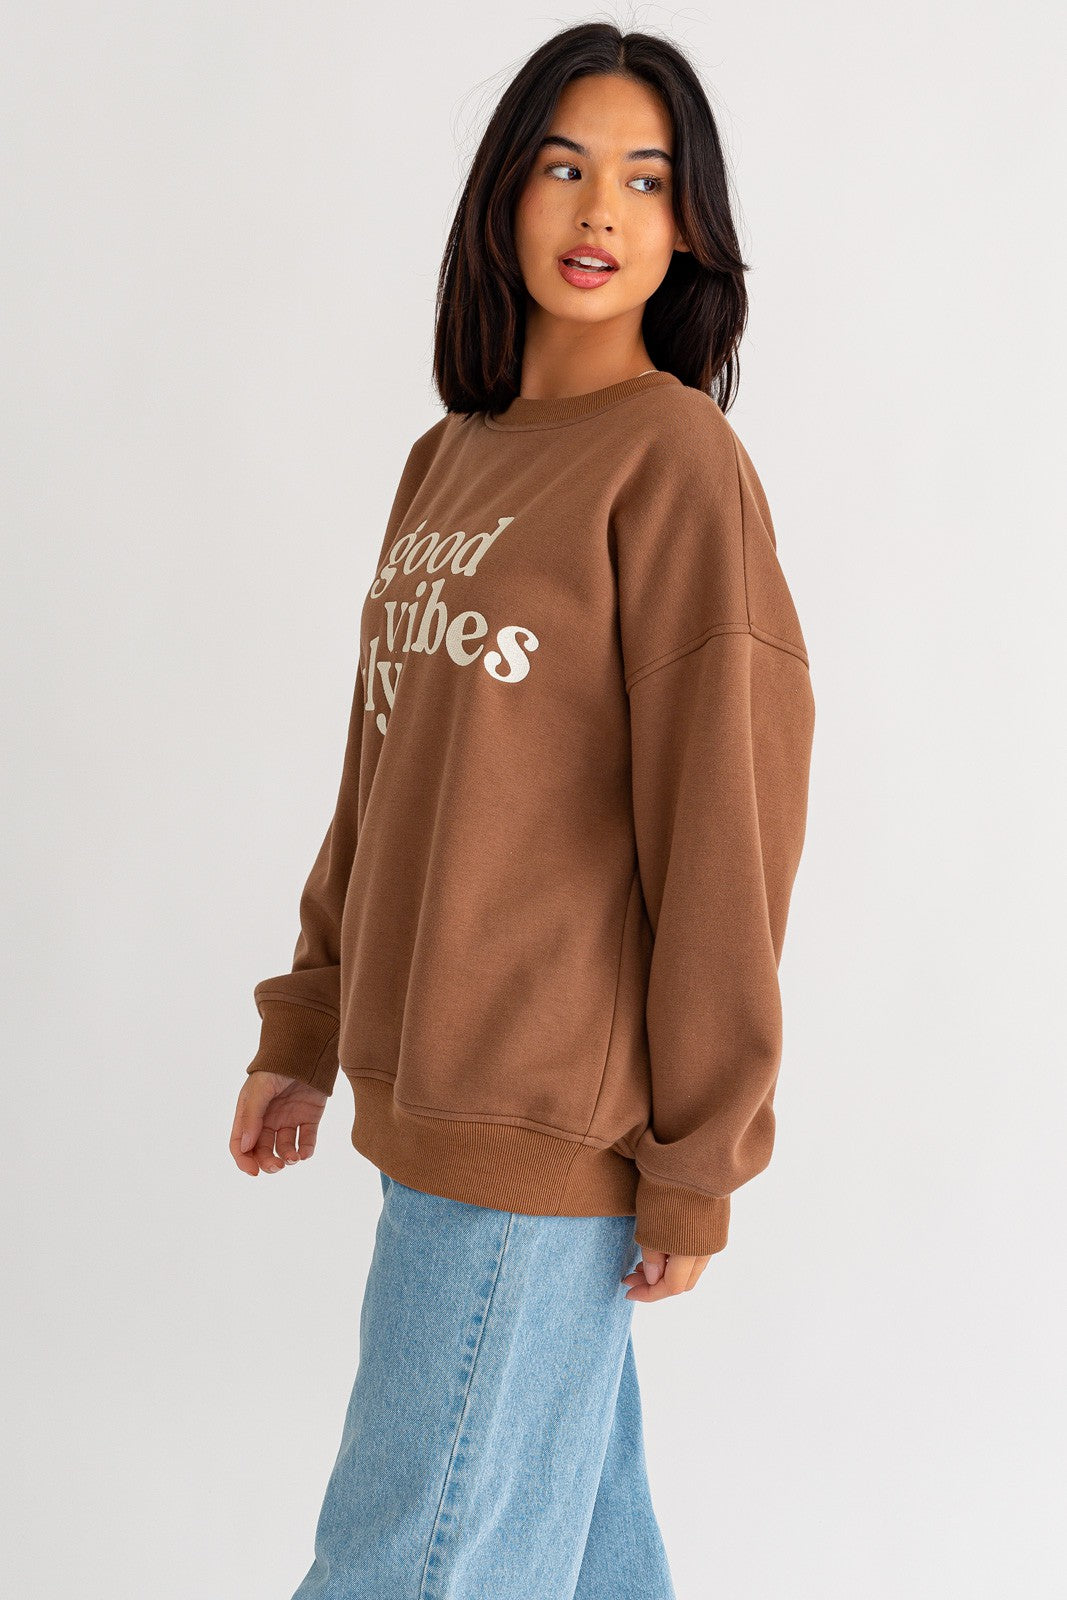 Good Vibes Only Long Sleeve Tee - Shirts, hoodie, tank top, sweater and  long sleeve t-shirt